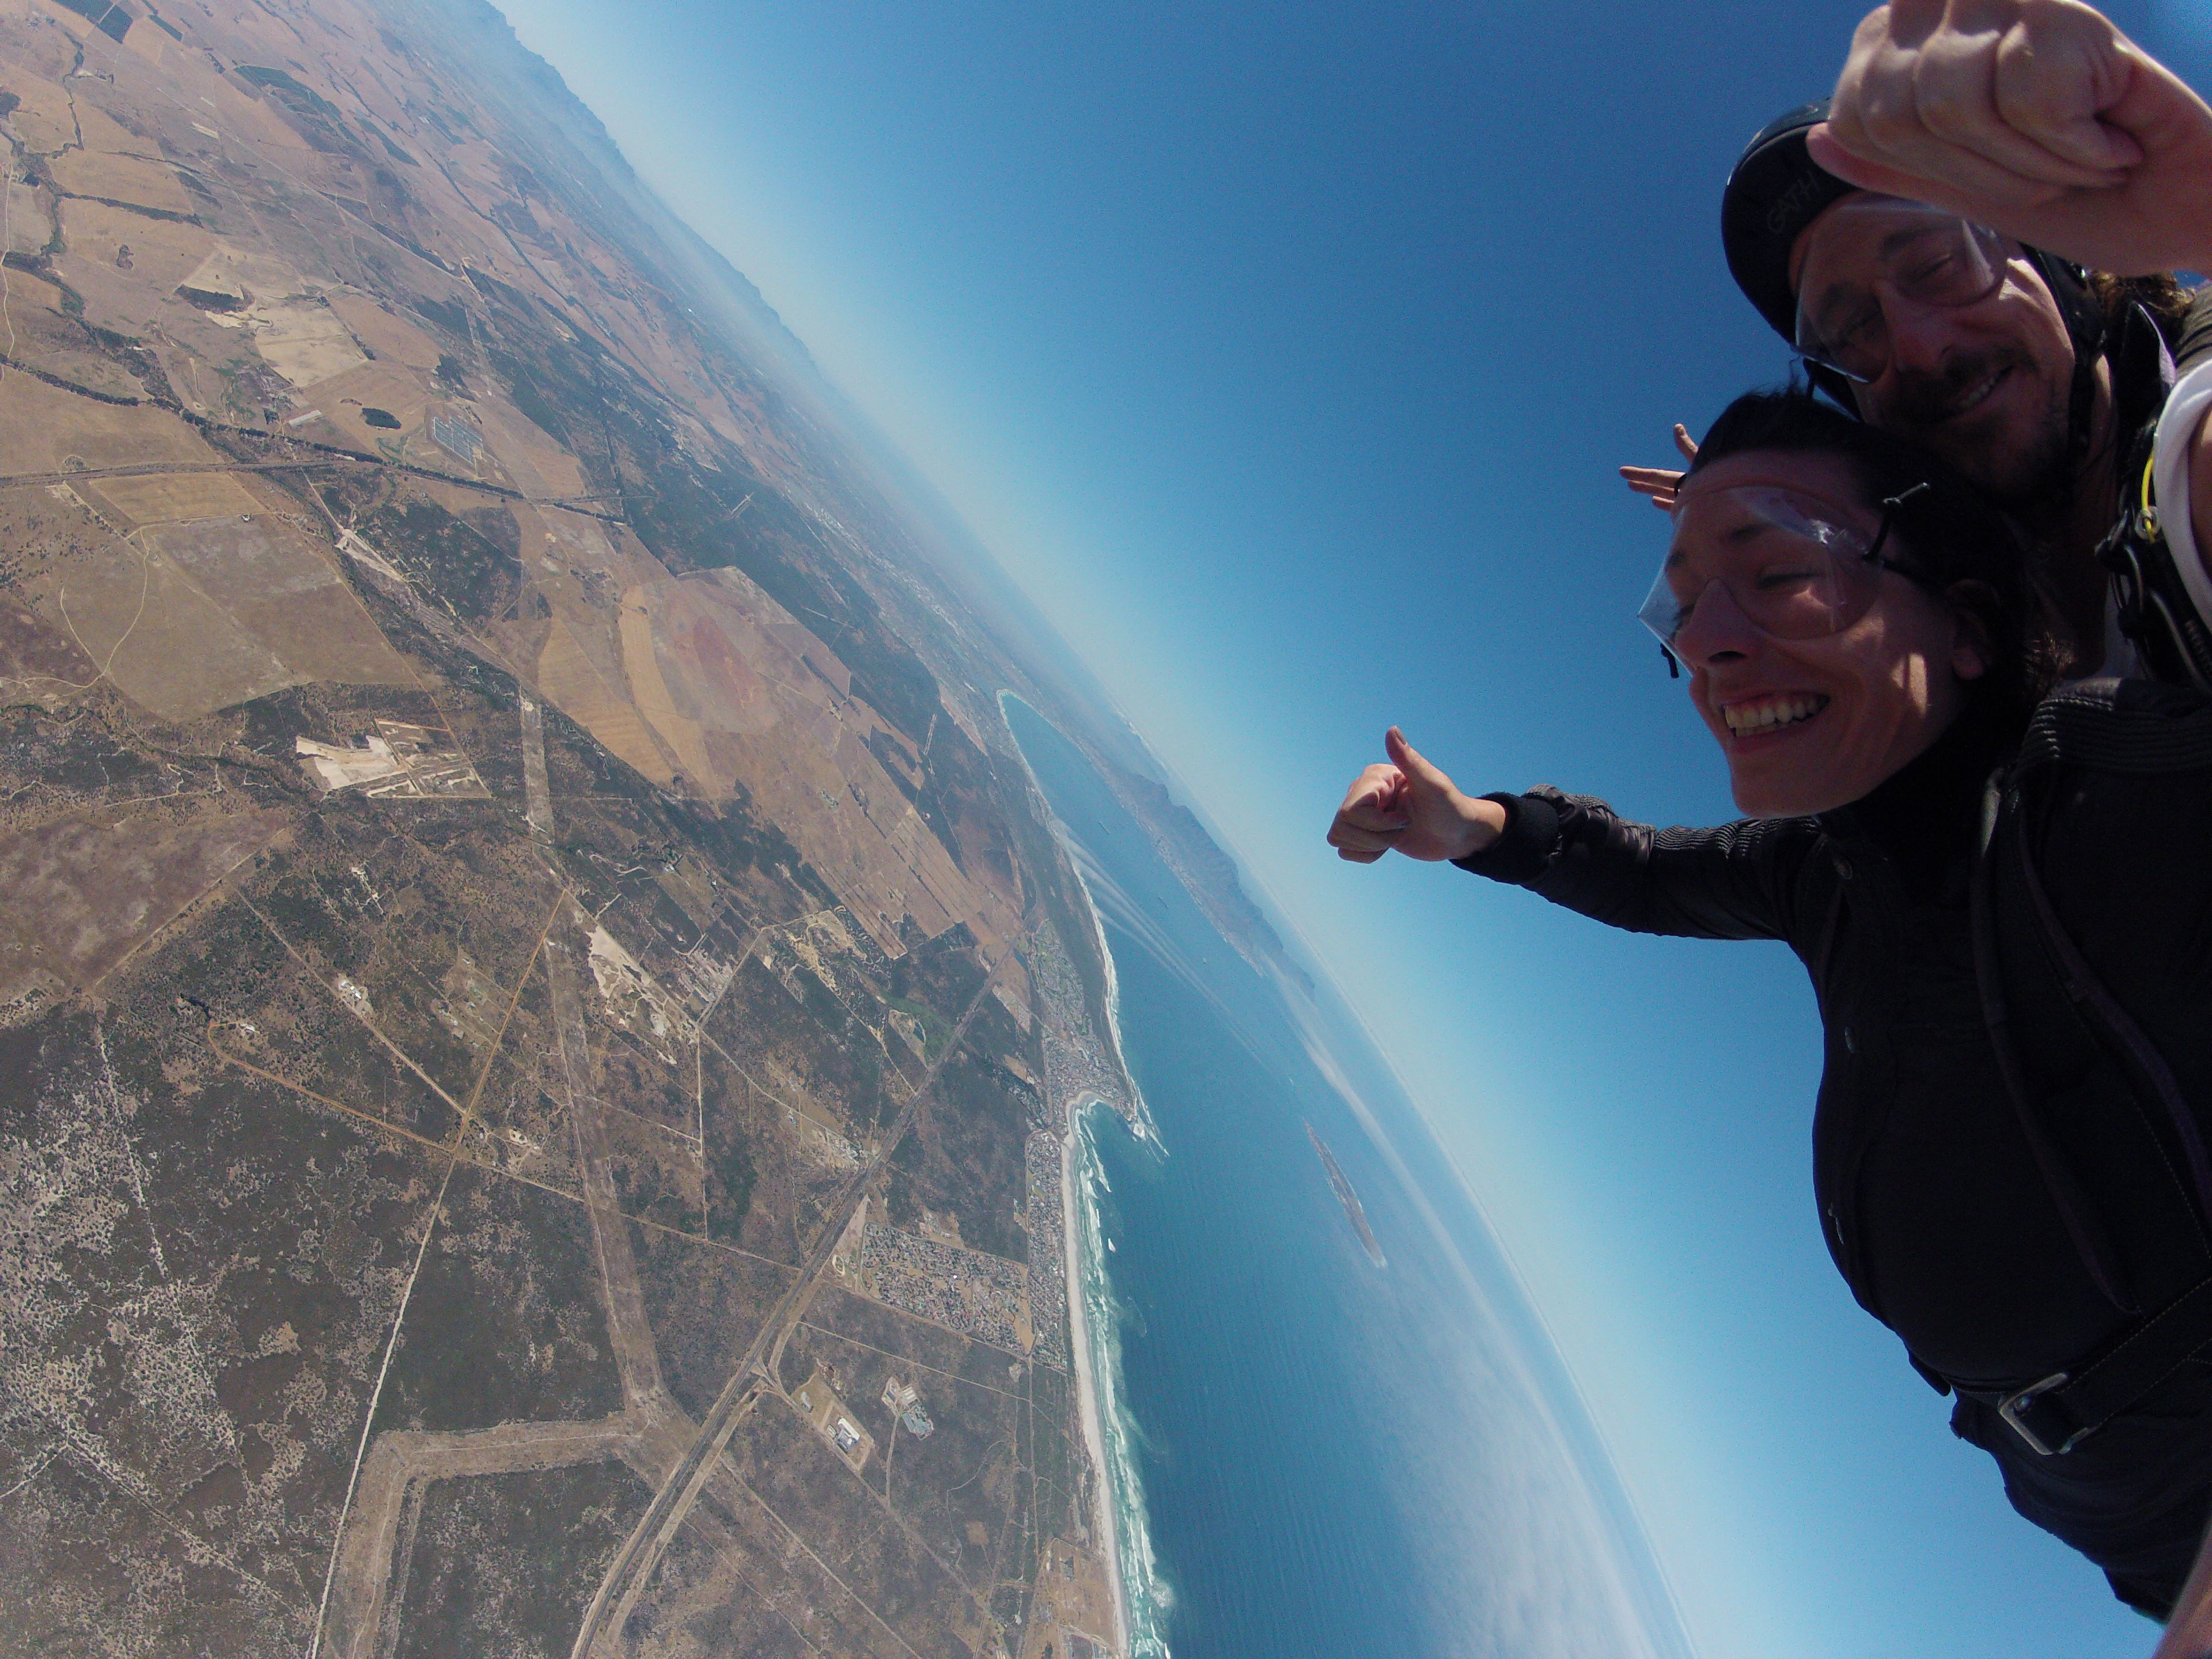 Skydive Cape Town View during skydive